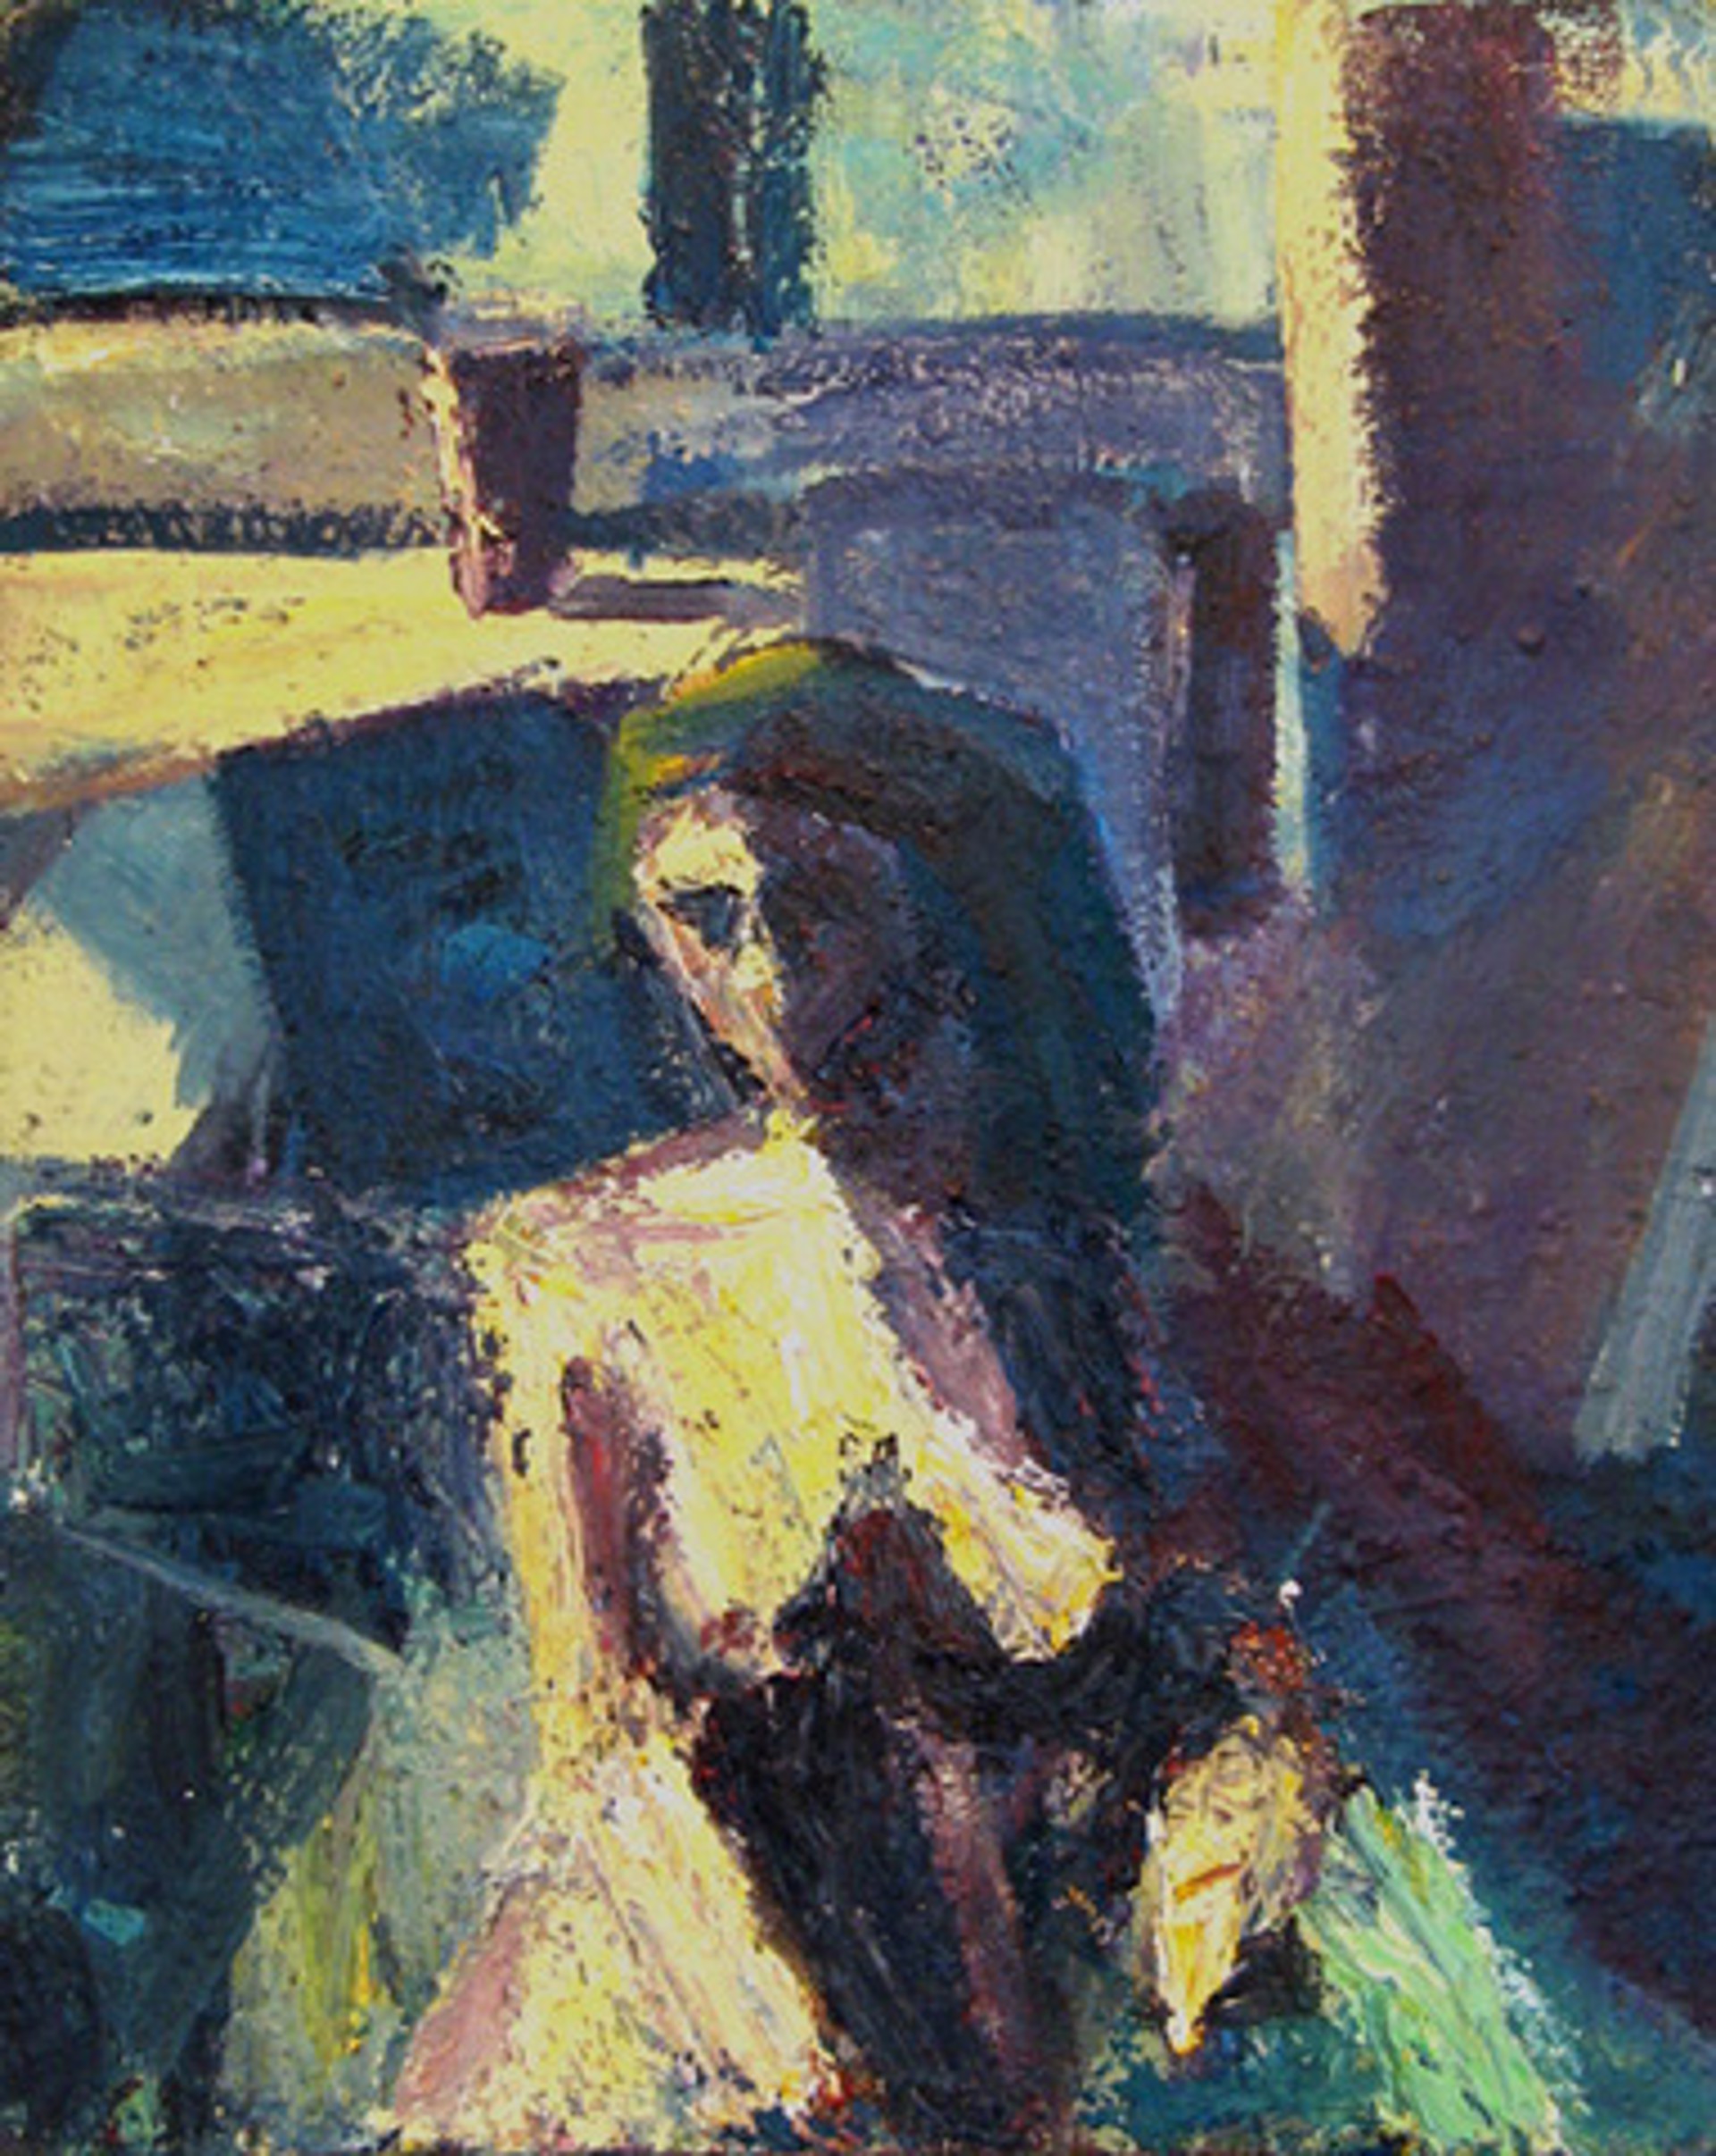 Woman with Cup by Terry St. John